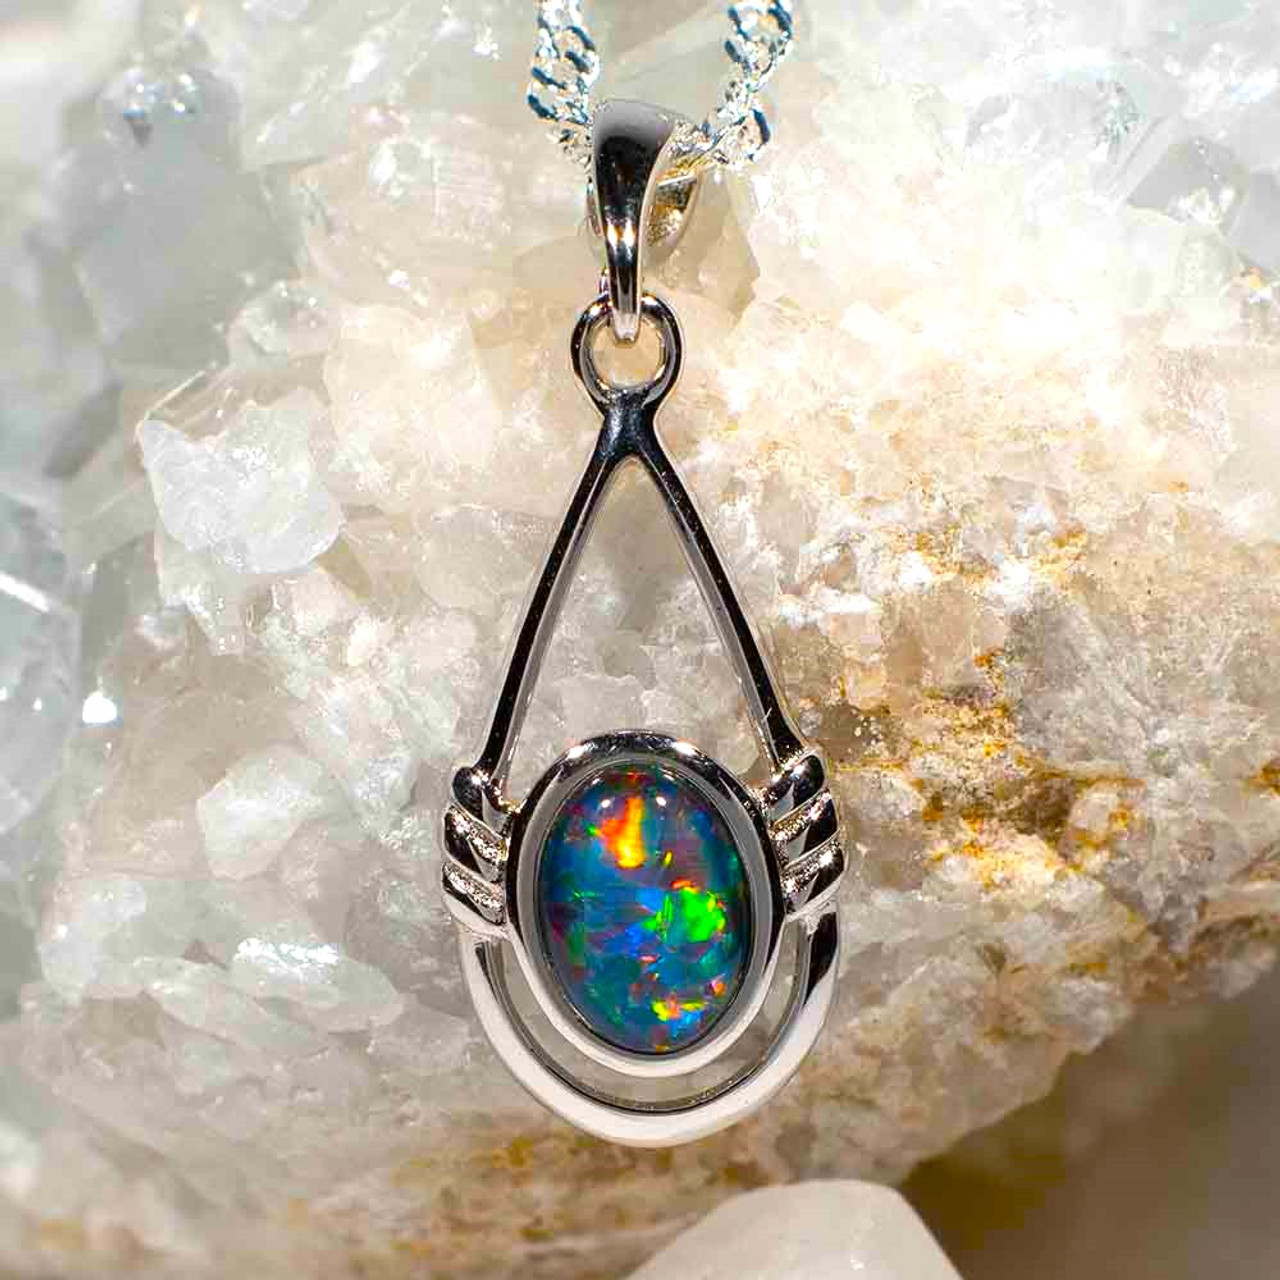 Amazon.com: 14K Gold Plated White Opal Necklace - 14K Gold Plated over 925  Sterling Silver, Dainty 12mm White Opal Gemstone Pendant, October  Birthstone, Handmade Vintage Antique Jewelry for Classy Women : Handmade  Products